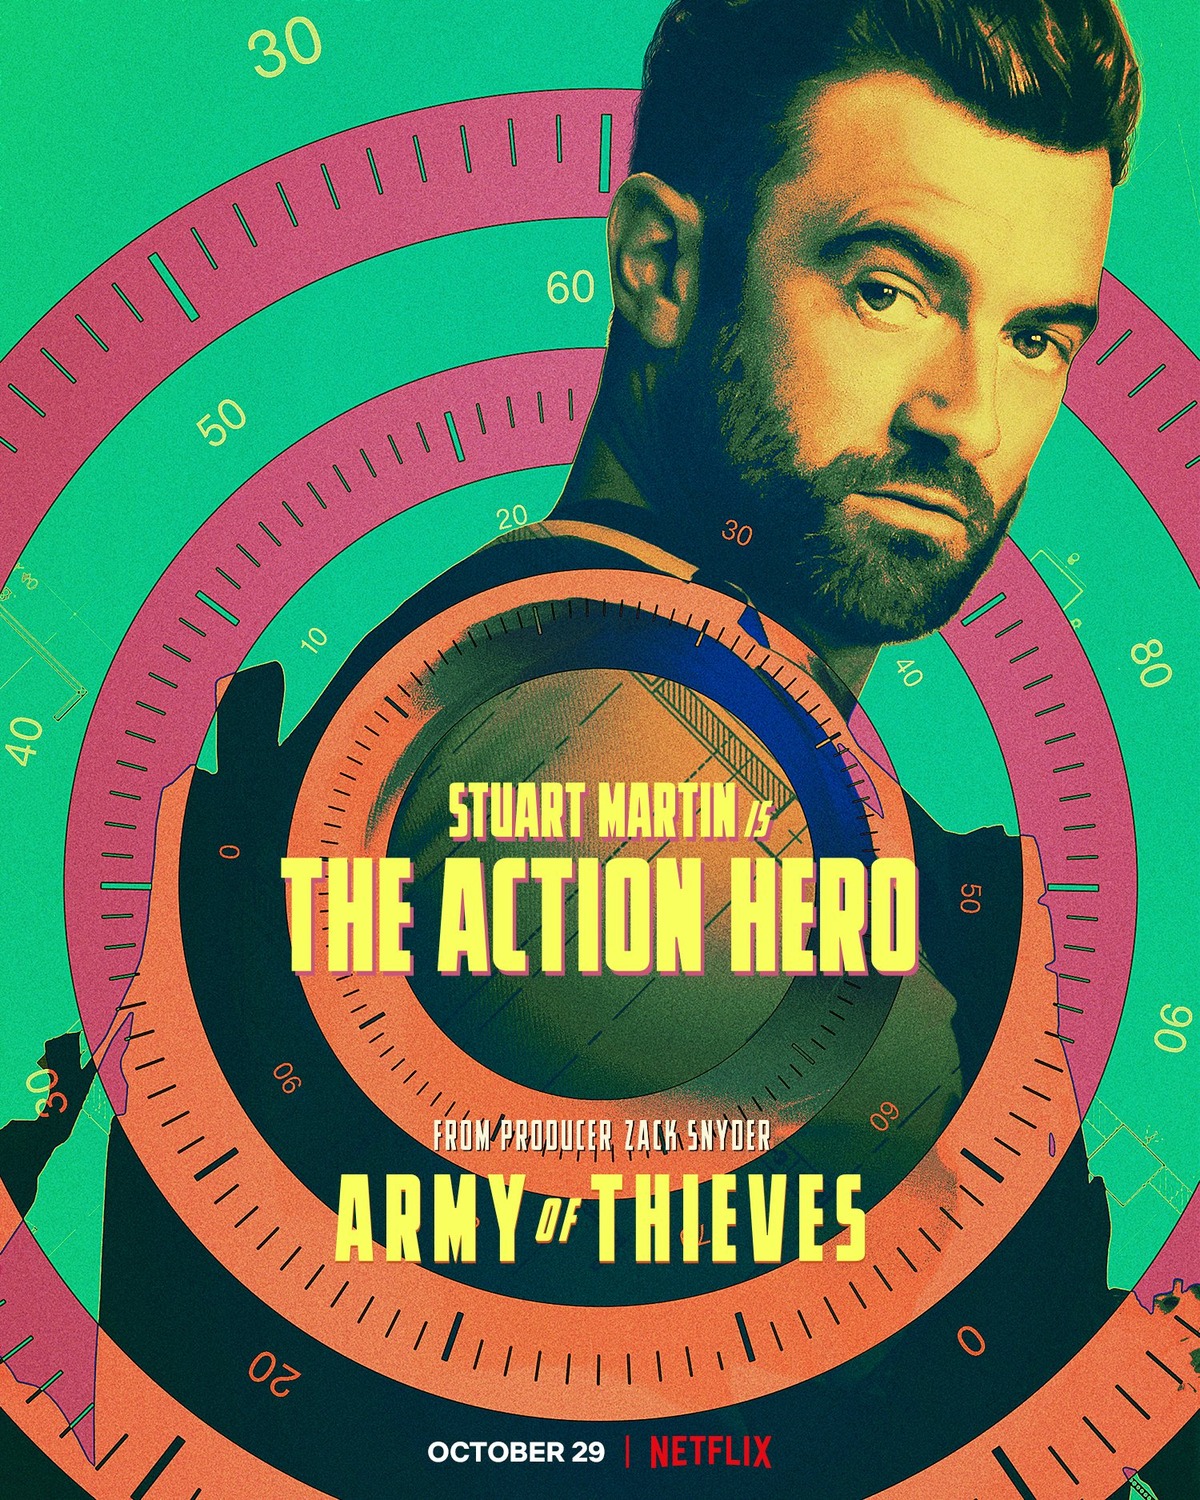 Army of Thieves (2021) Poster - Stuart Martin is The Action Hero